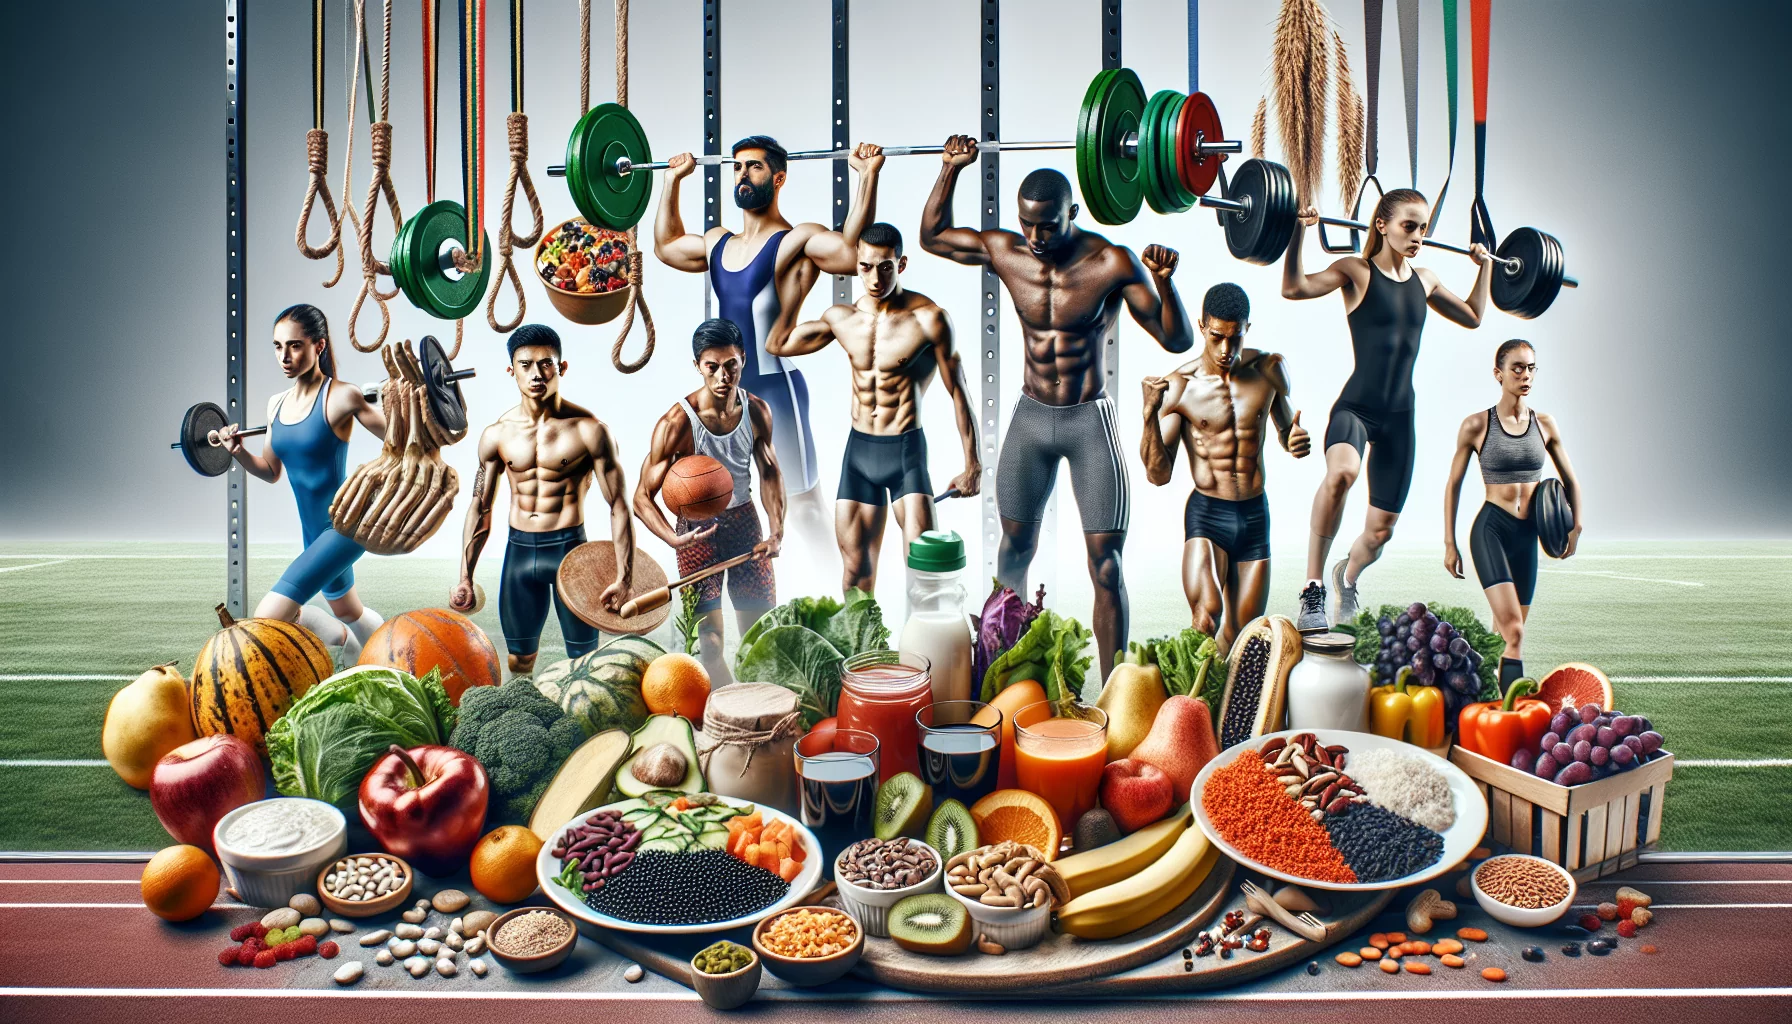 World-class athletes embrace plant-based diets for performance and ethical benefits